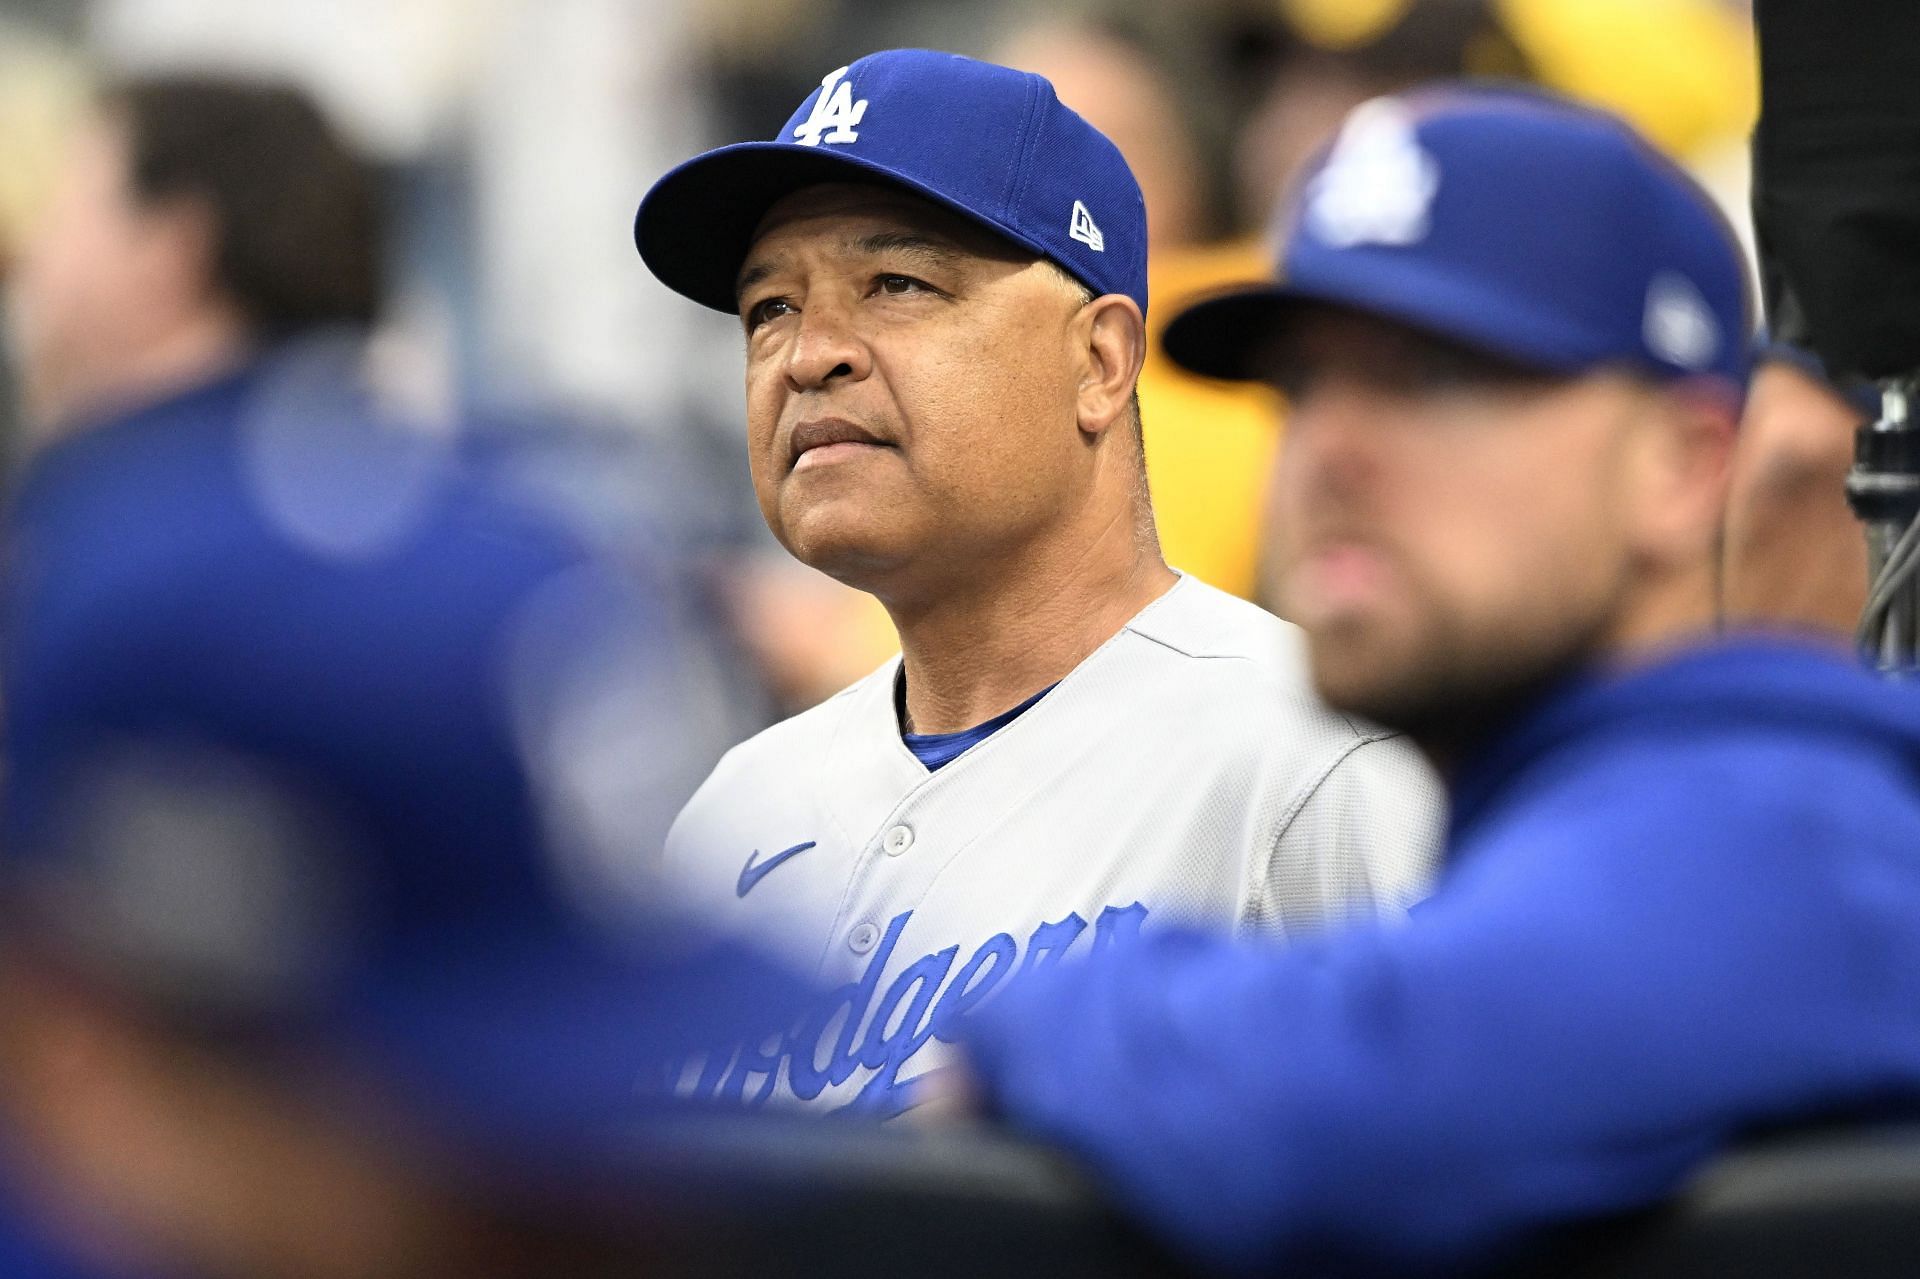 Dodgers manager Dave Roberts saving his sentimental side for